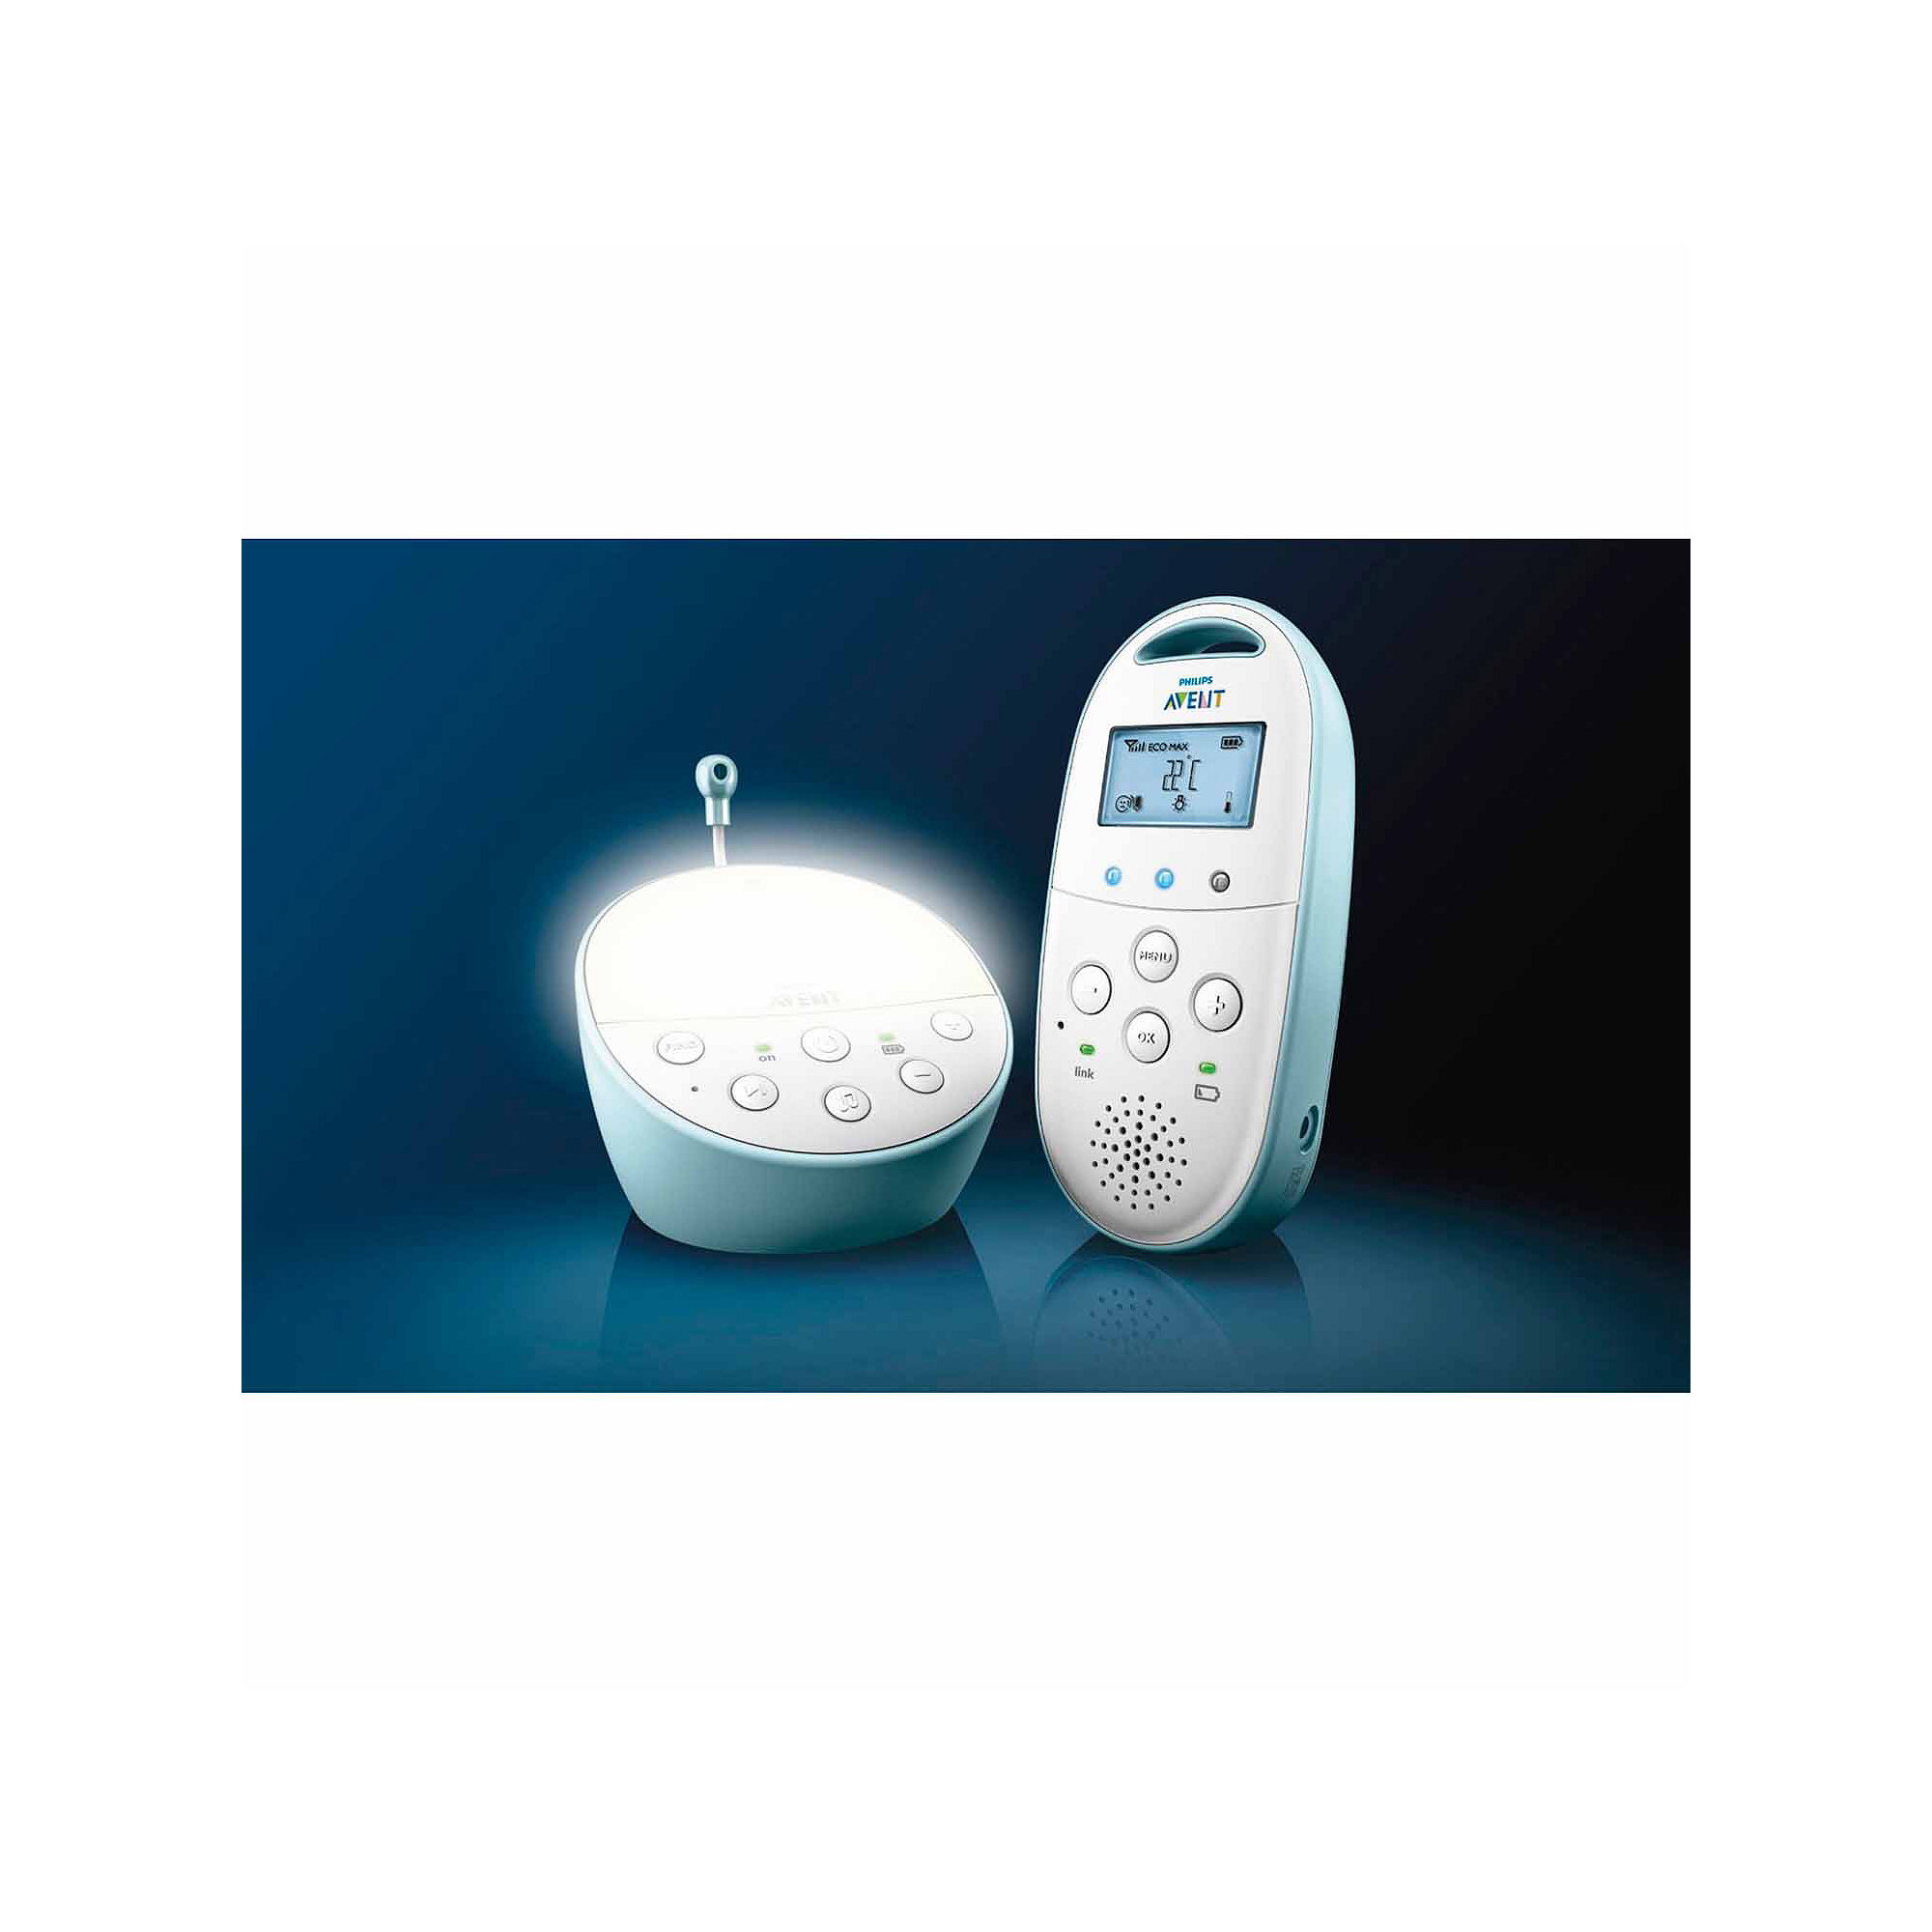 Philips Avent Dect Audio Baby Monitor SCD560/10 (Discontinued by Manufacturer) - image 3 of 4